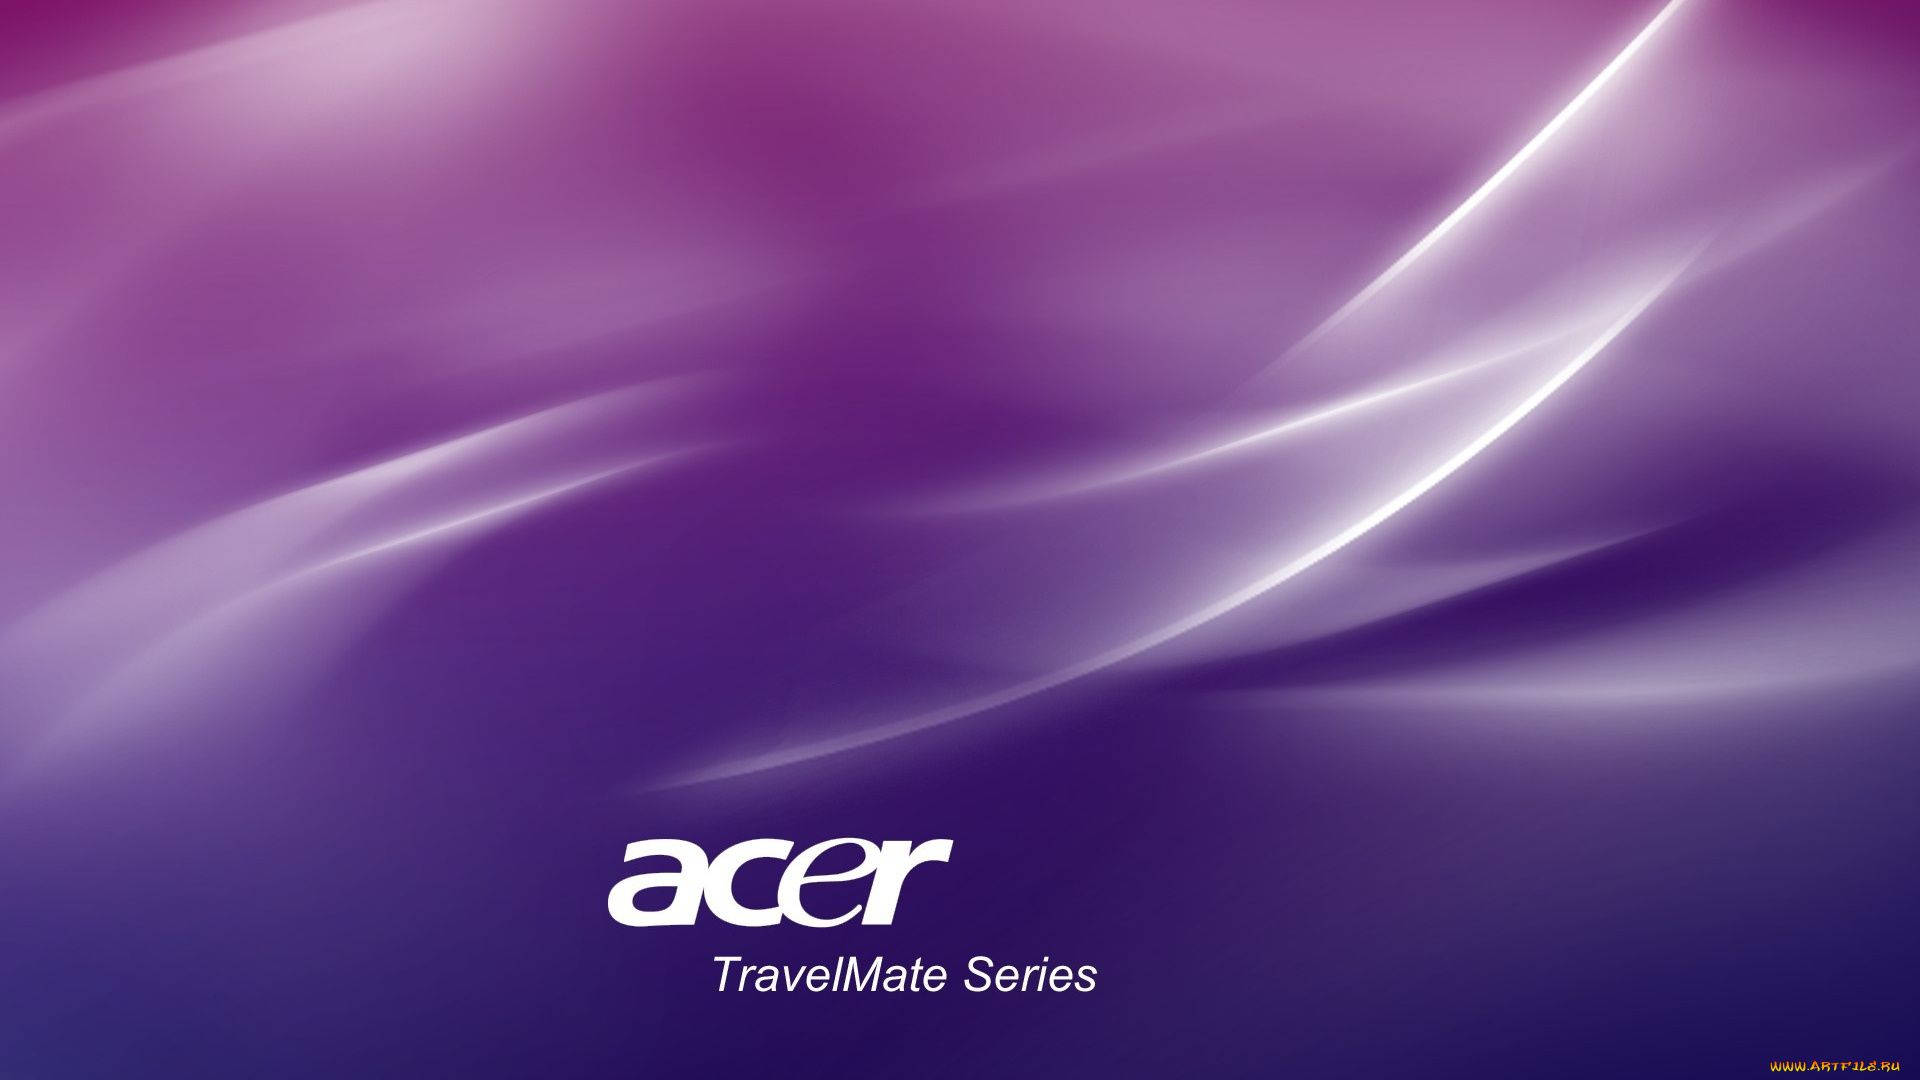 Acer Travelmate Series Laptop In Vibrant Purple Background Background